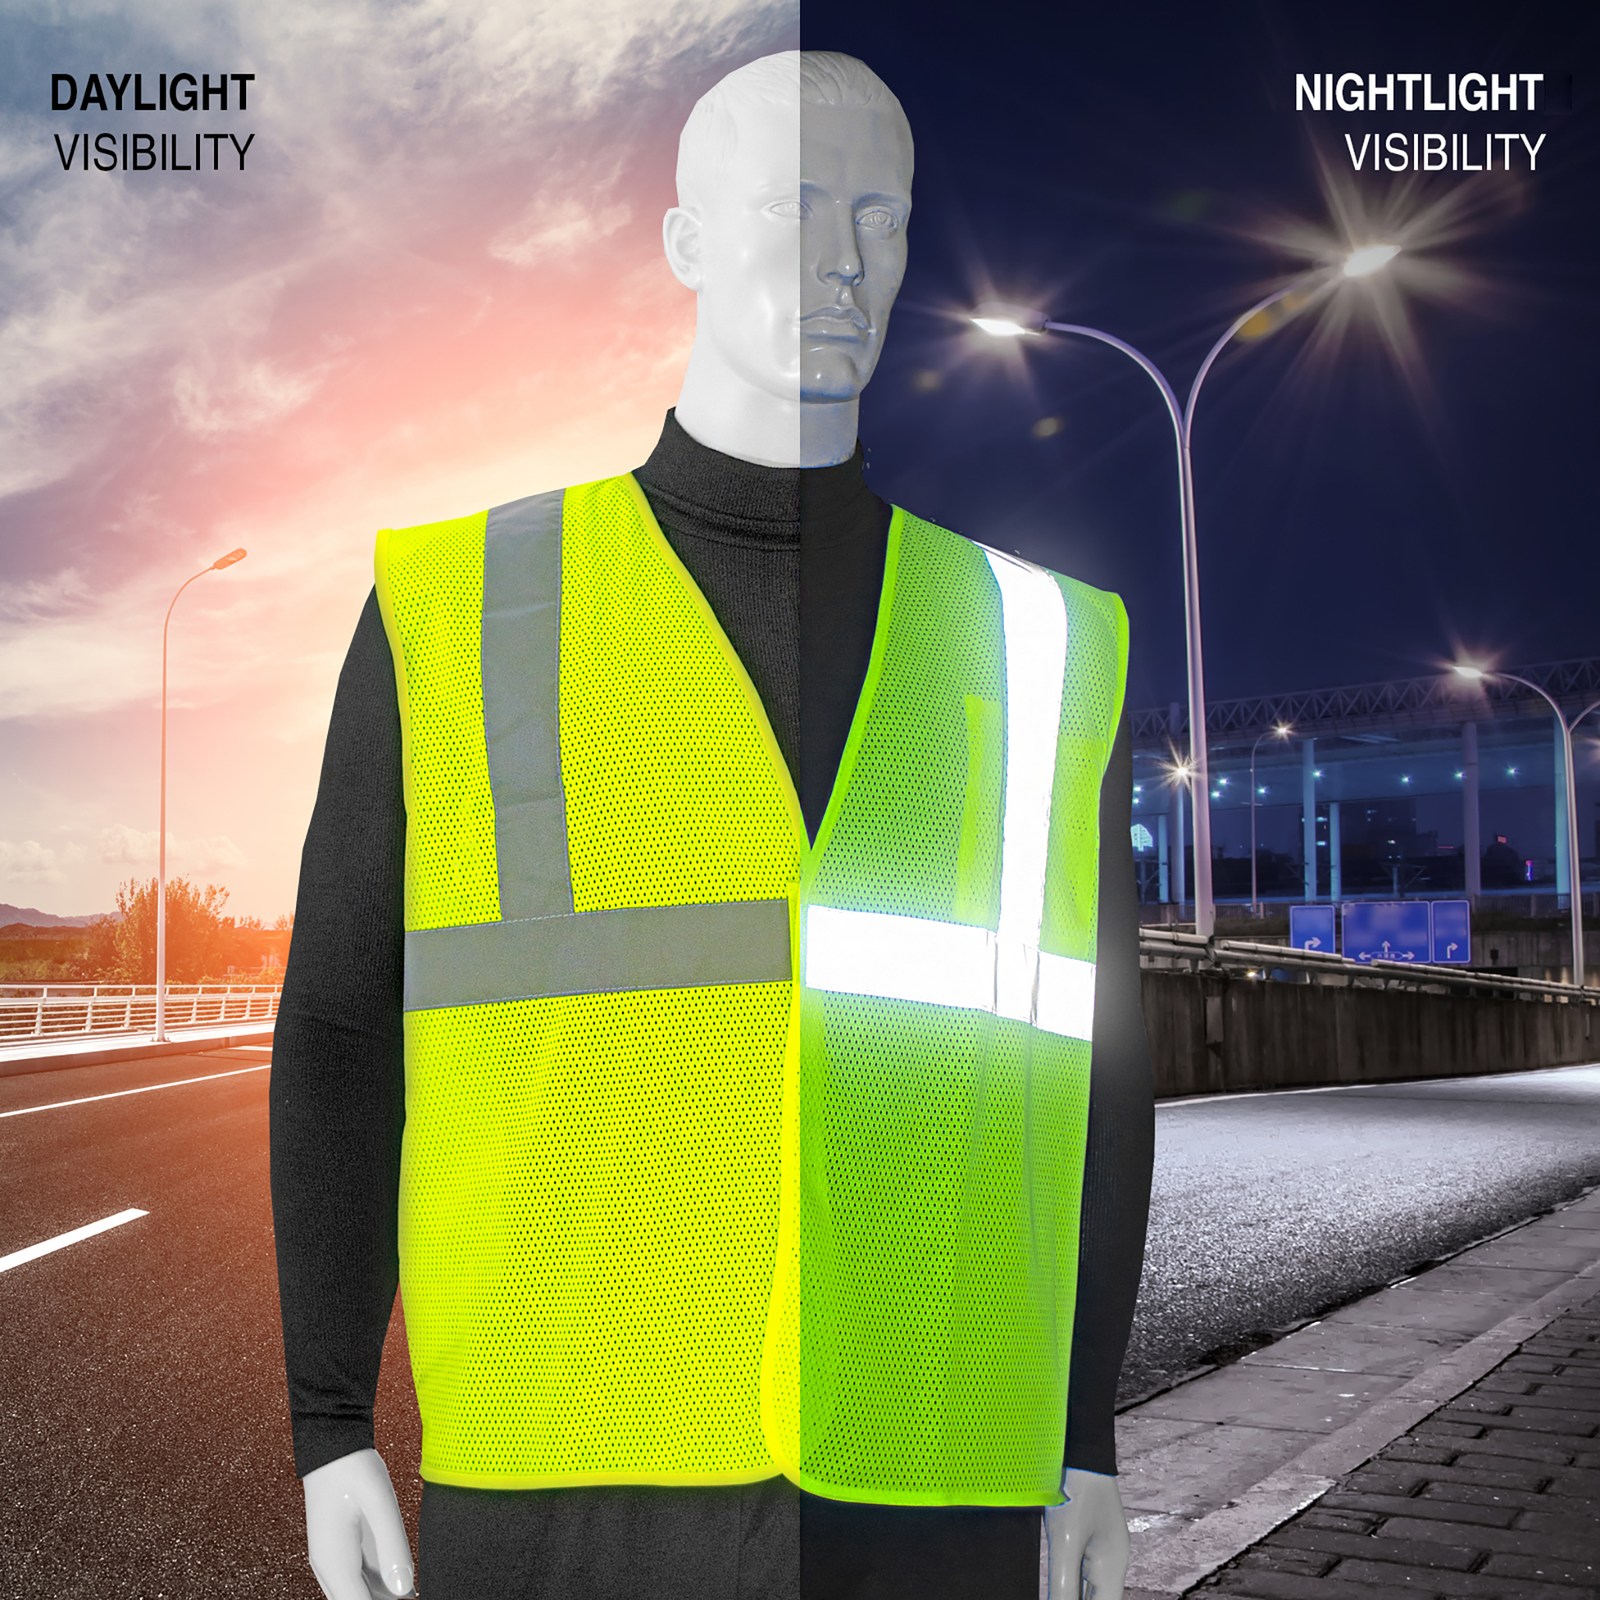 Mannequin wearing a printed lime Jorestech safety vest and compares how bright it looks during day and night time